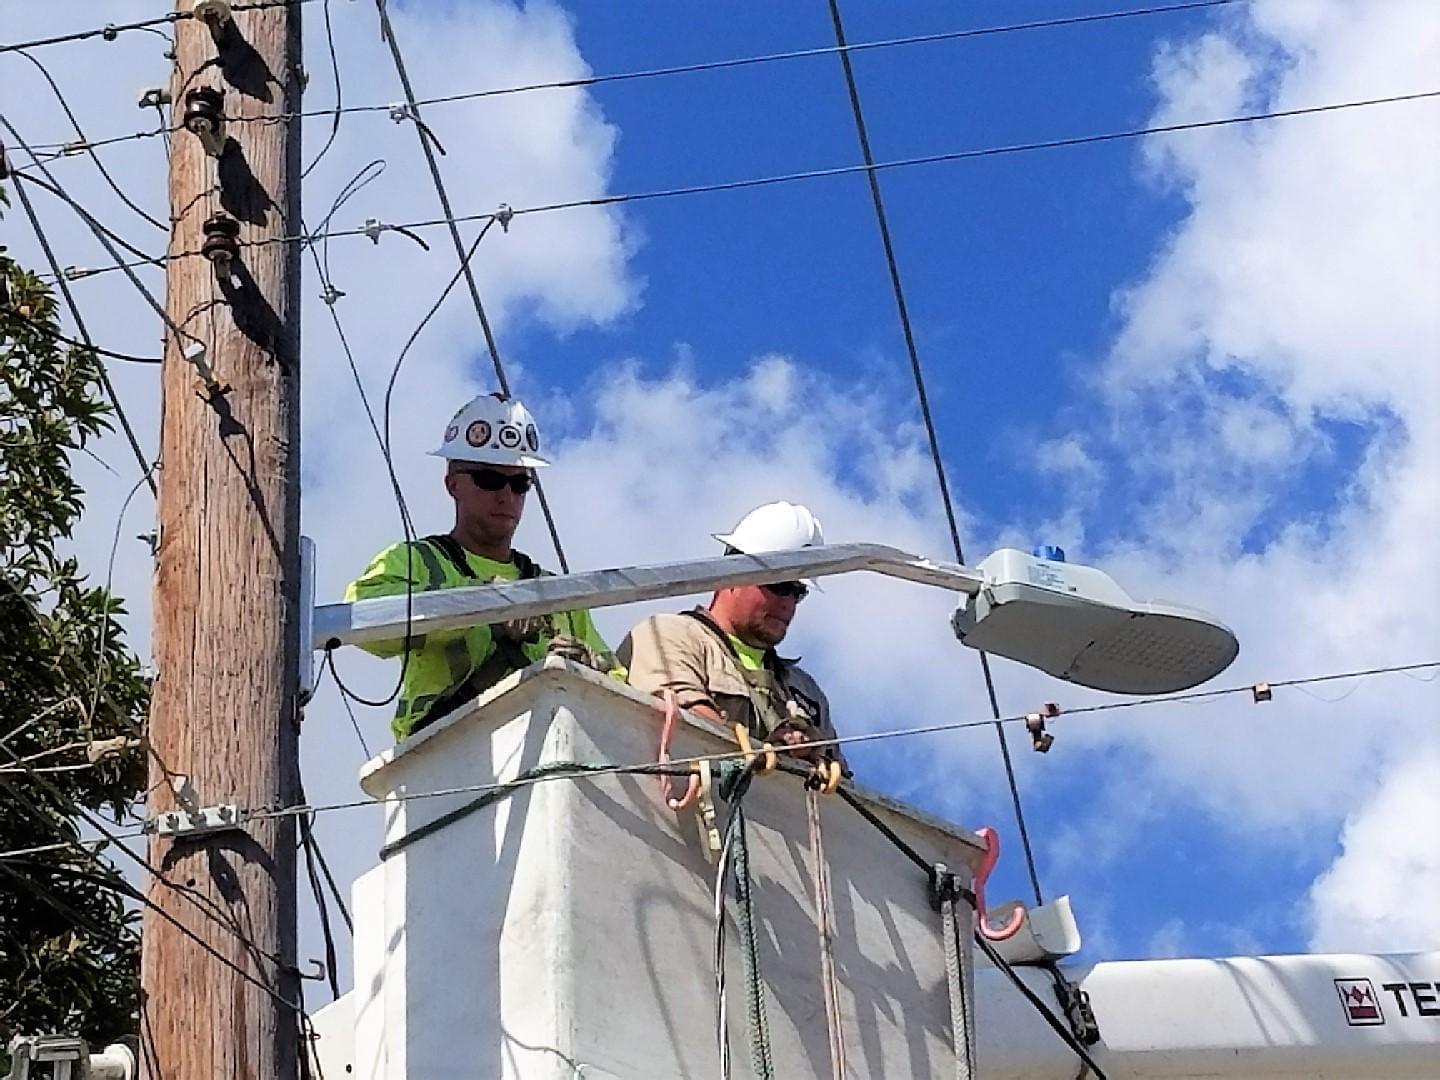 City Water, Light and Power crews traveled to Lake Worth, Florida, to help restore power after Hurricane Irma.